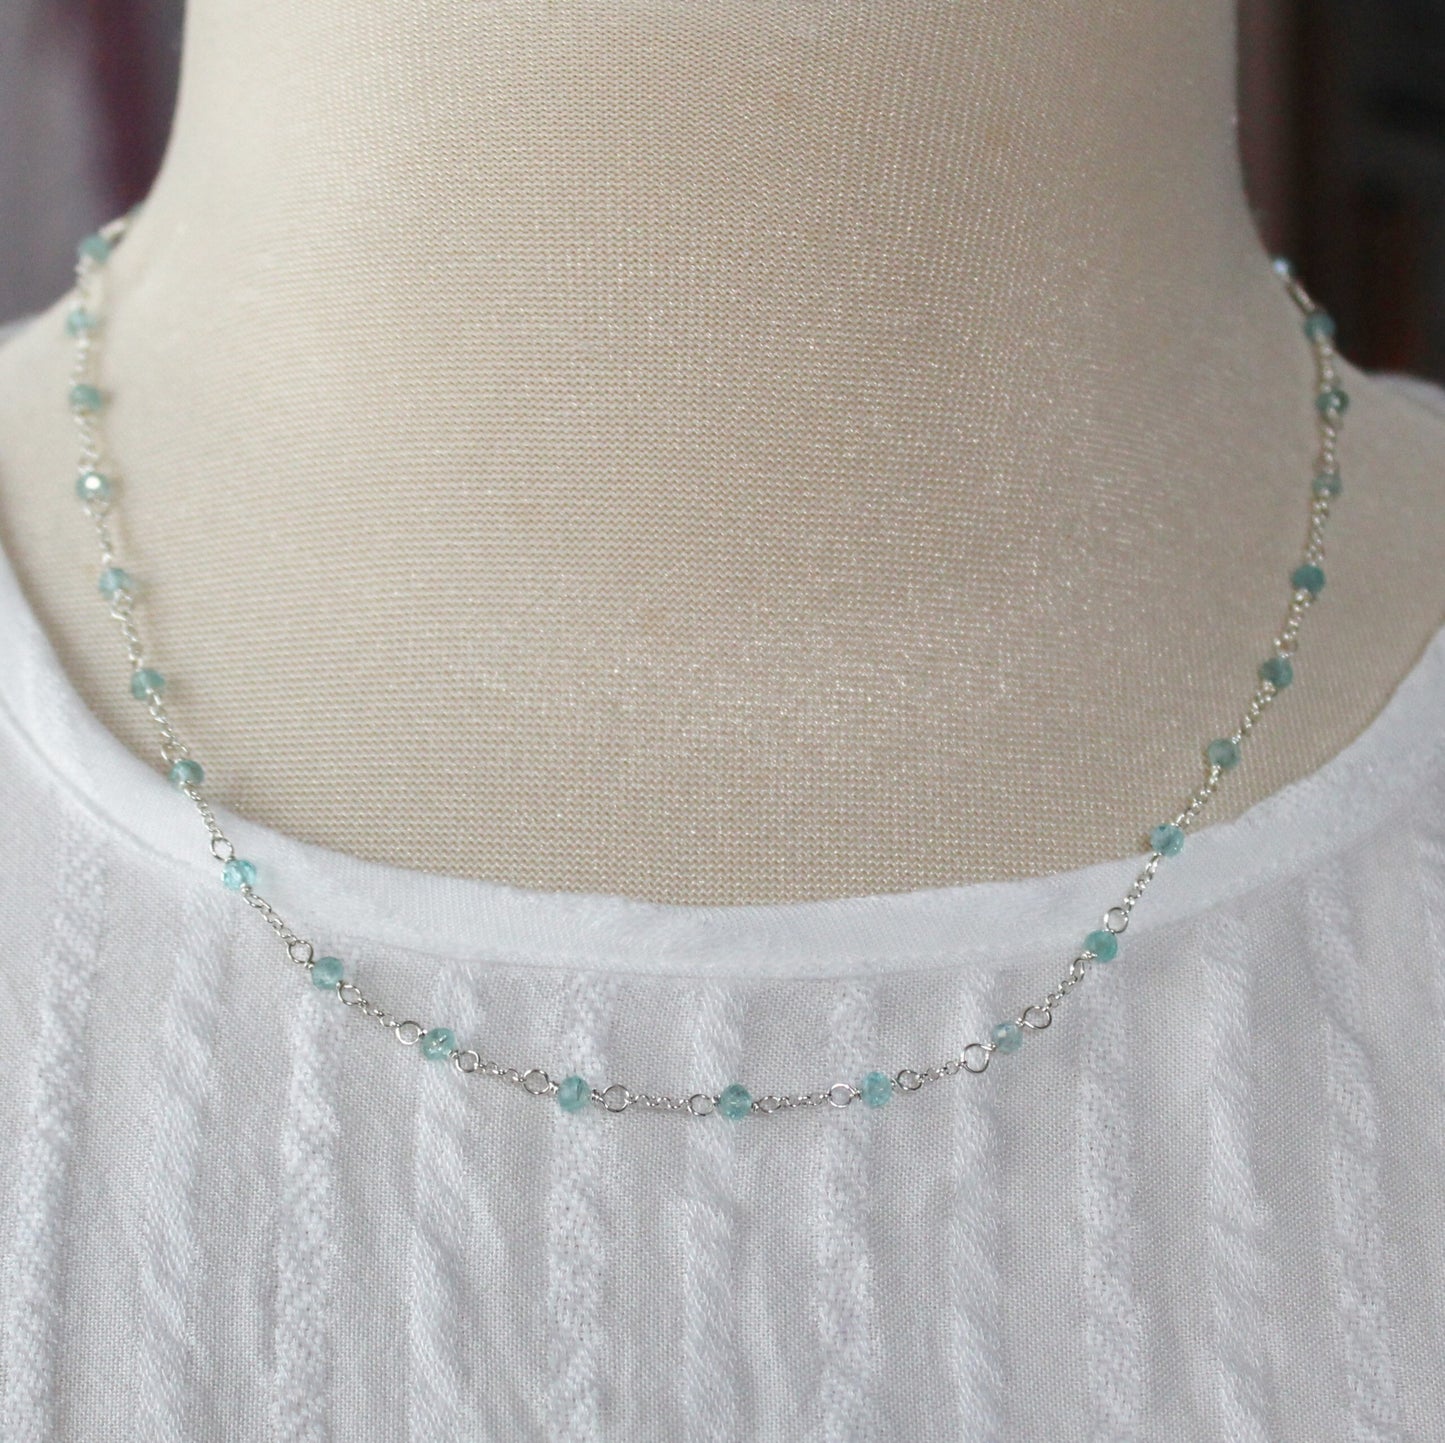 Apatite Satellite Chain Necklace Sterling Silver - Darby